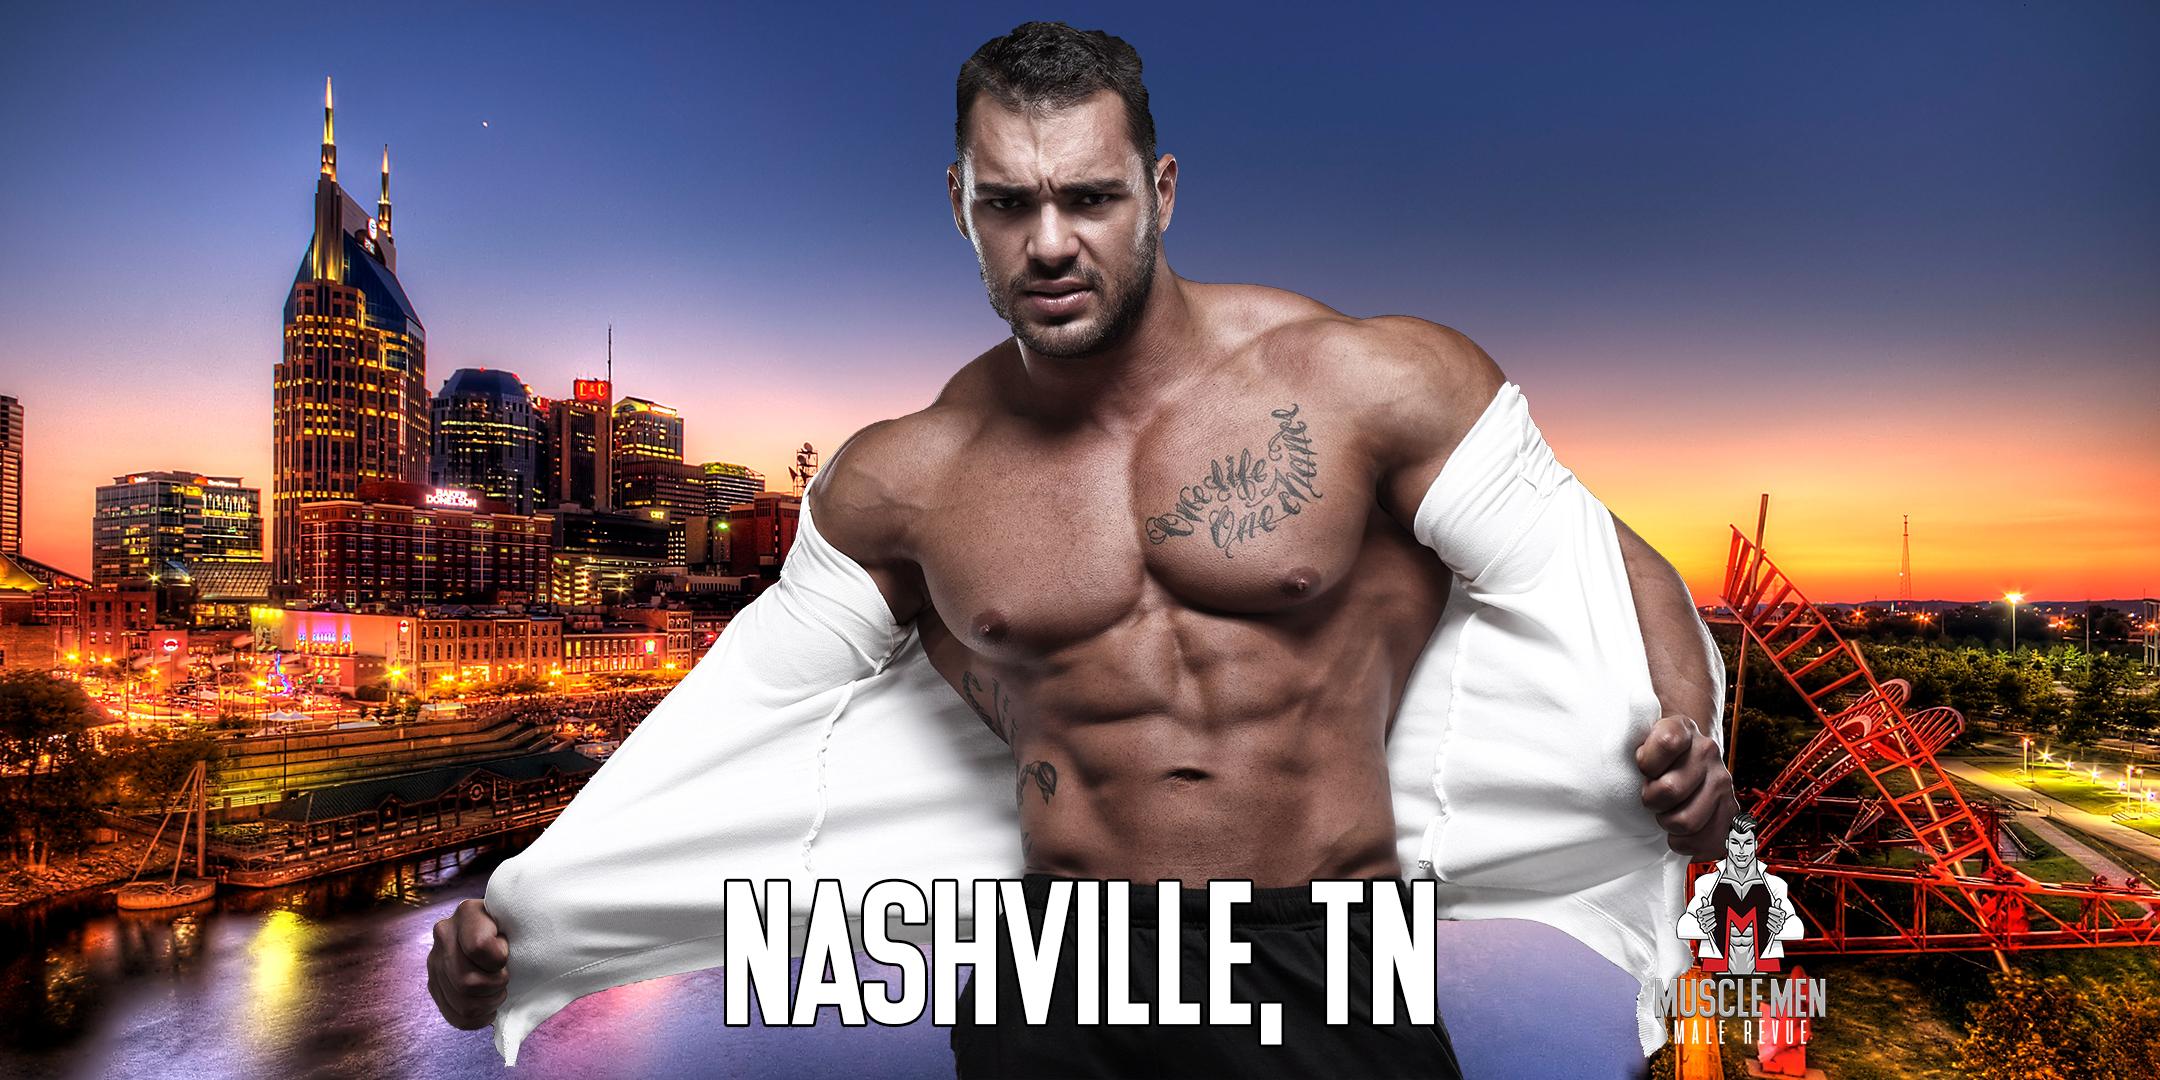 Muscle Men Male Strippers Revue And Male Strip Club Shows Nashville Tn